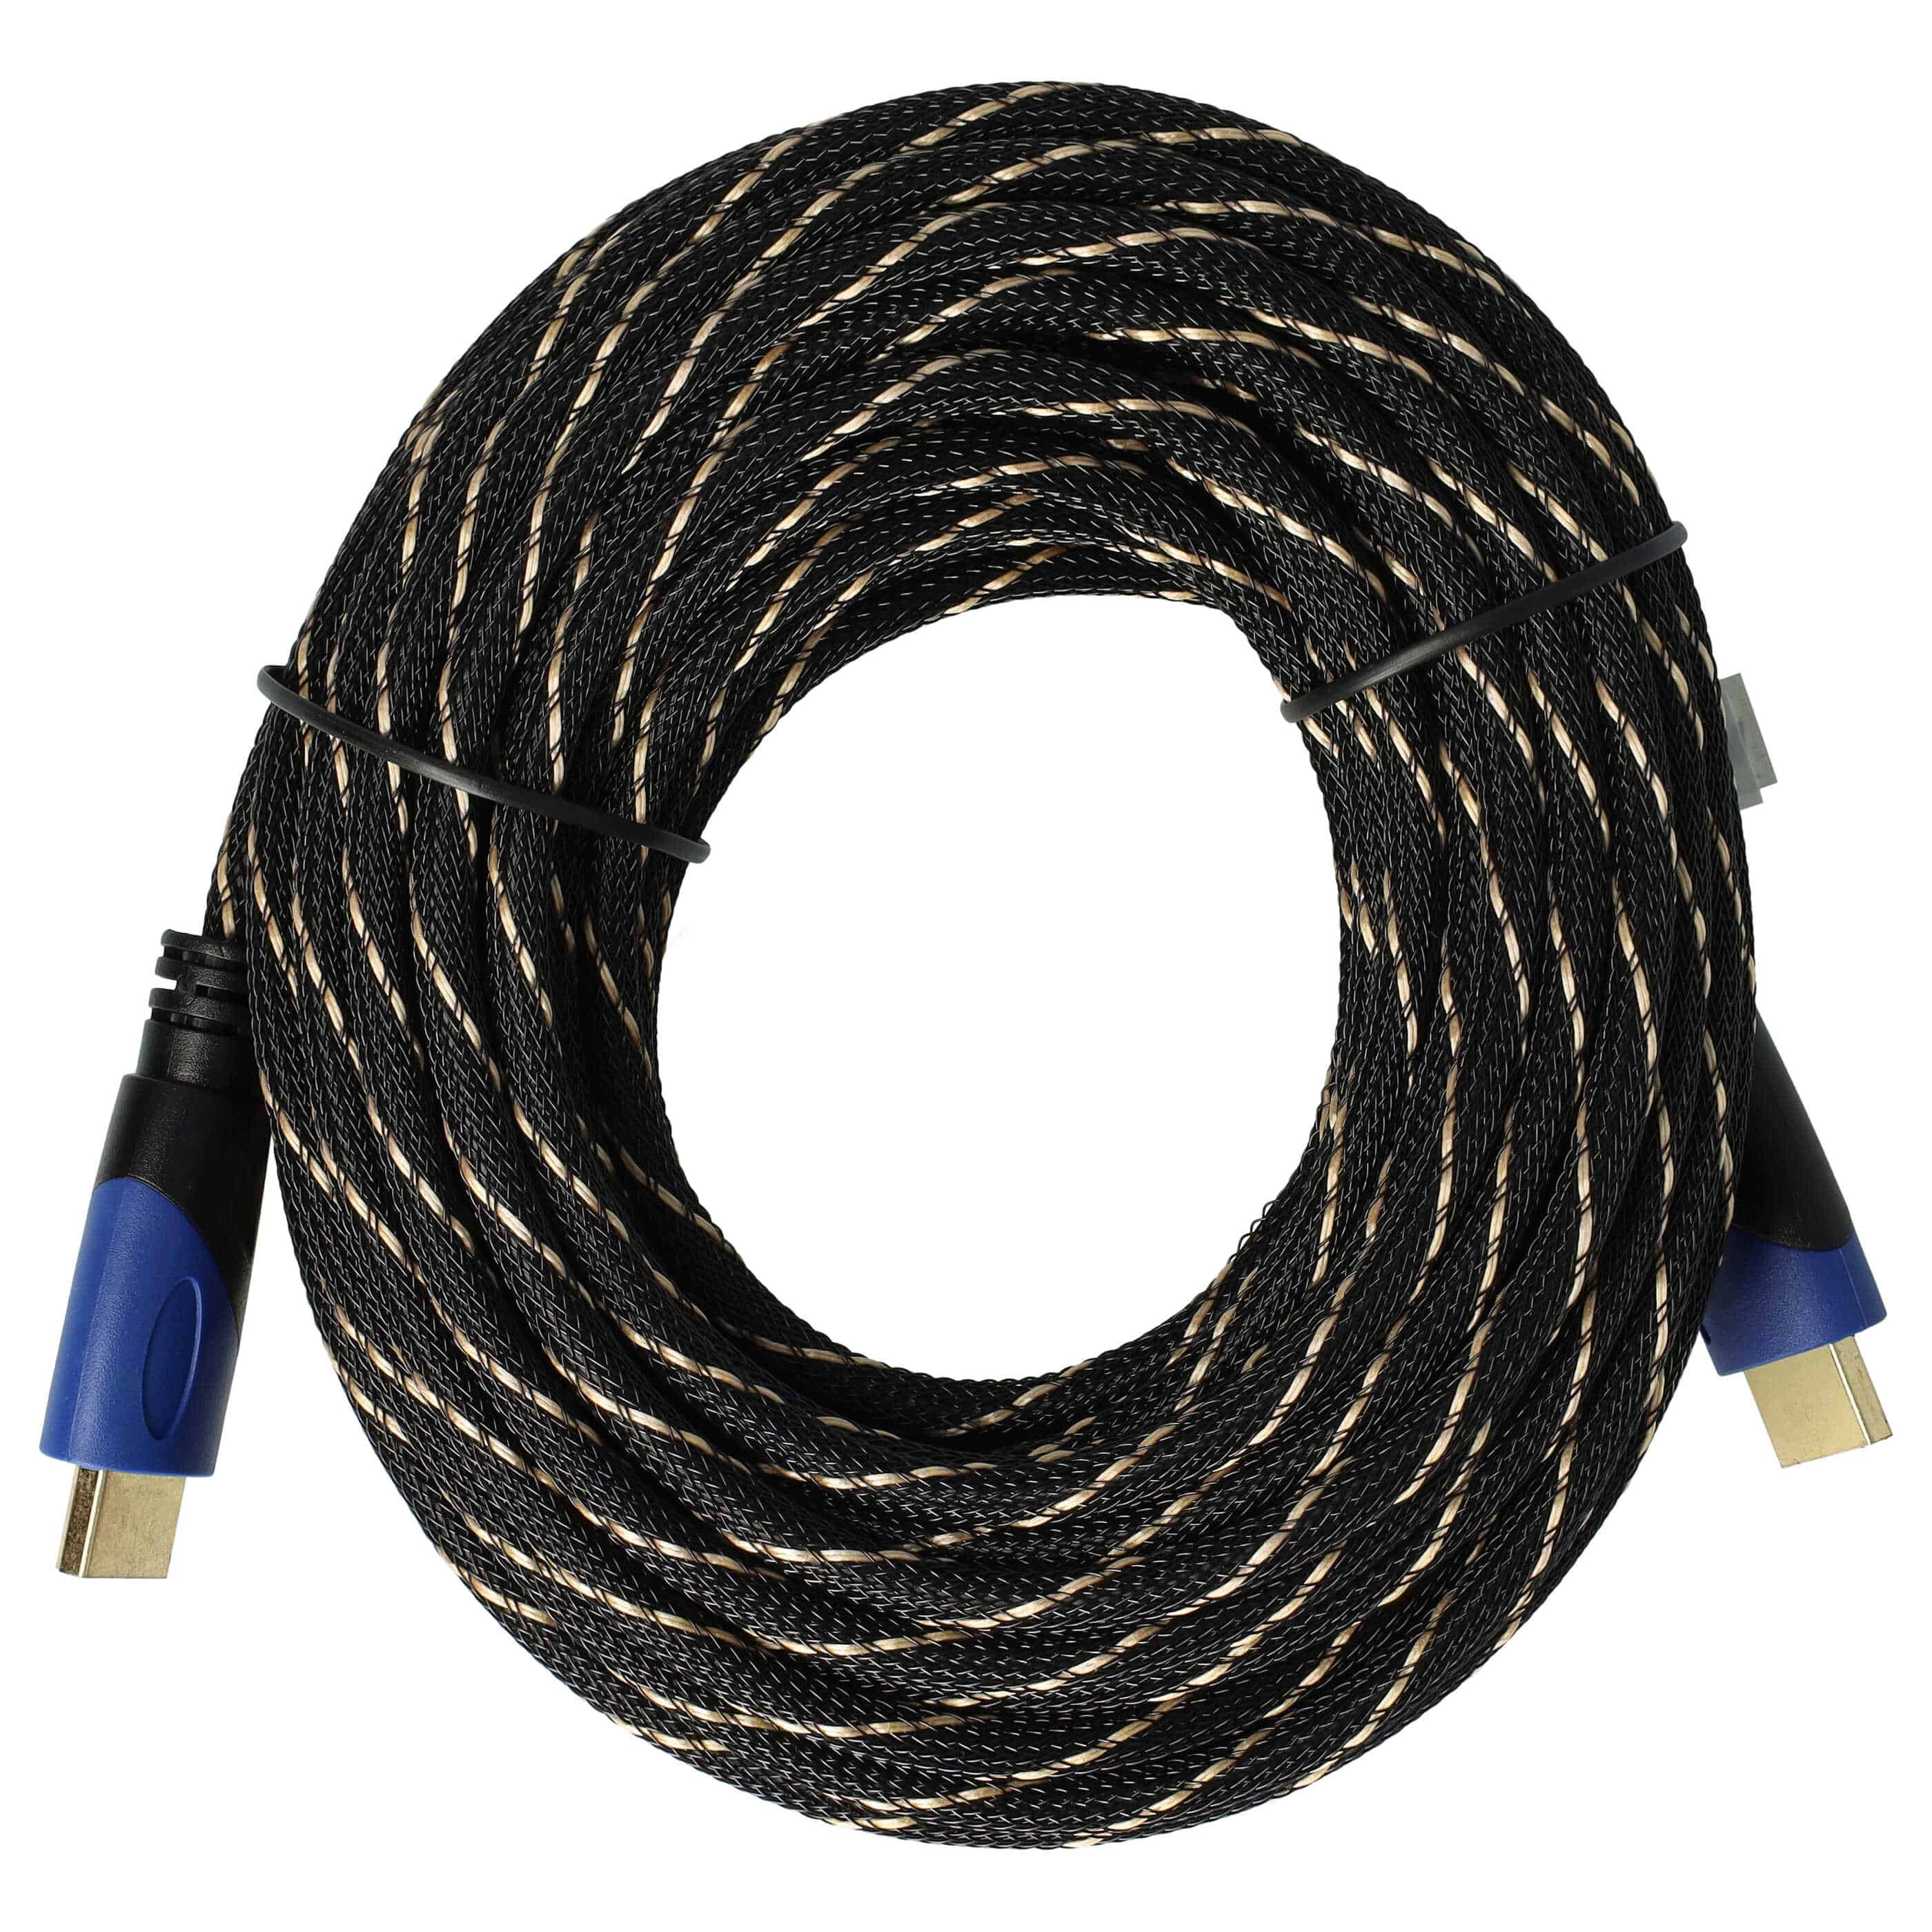 HDMI Cable V1.4 High Speed braided 10mfor Tablet, TV, Television, Playstation, Computer, Monitor, DVD Player e